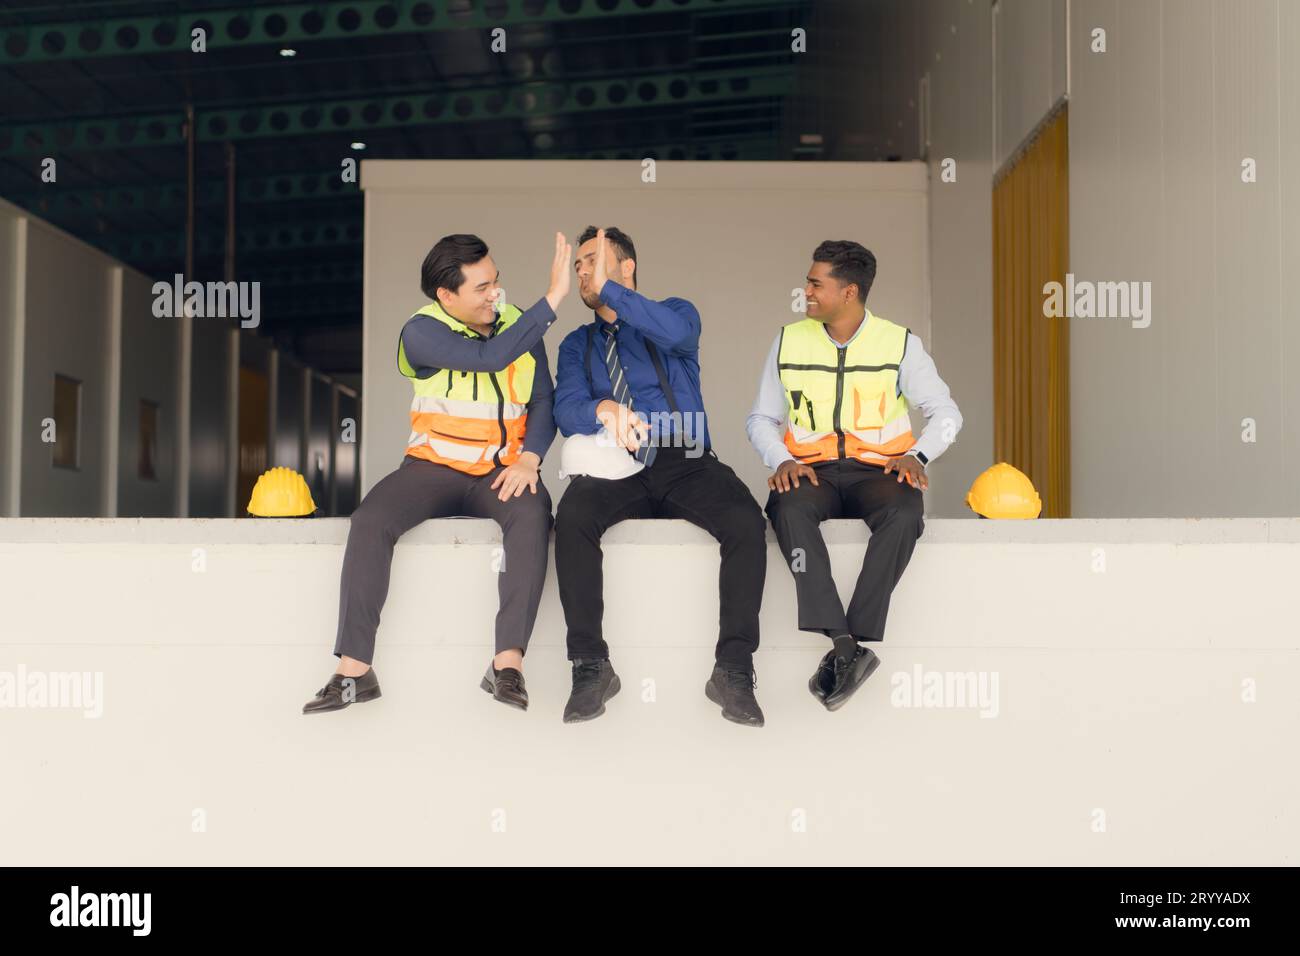 A warehouse manager and two employees are resting after dealing with how to organize the shelves in a large warehouse. Stock Photo